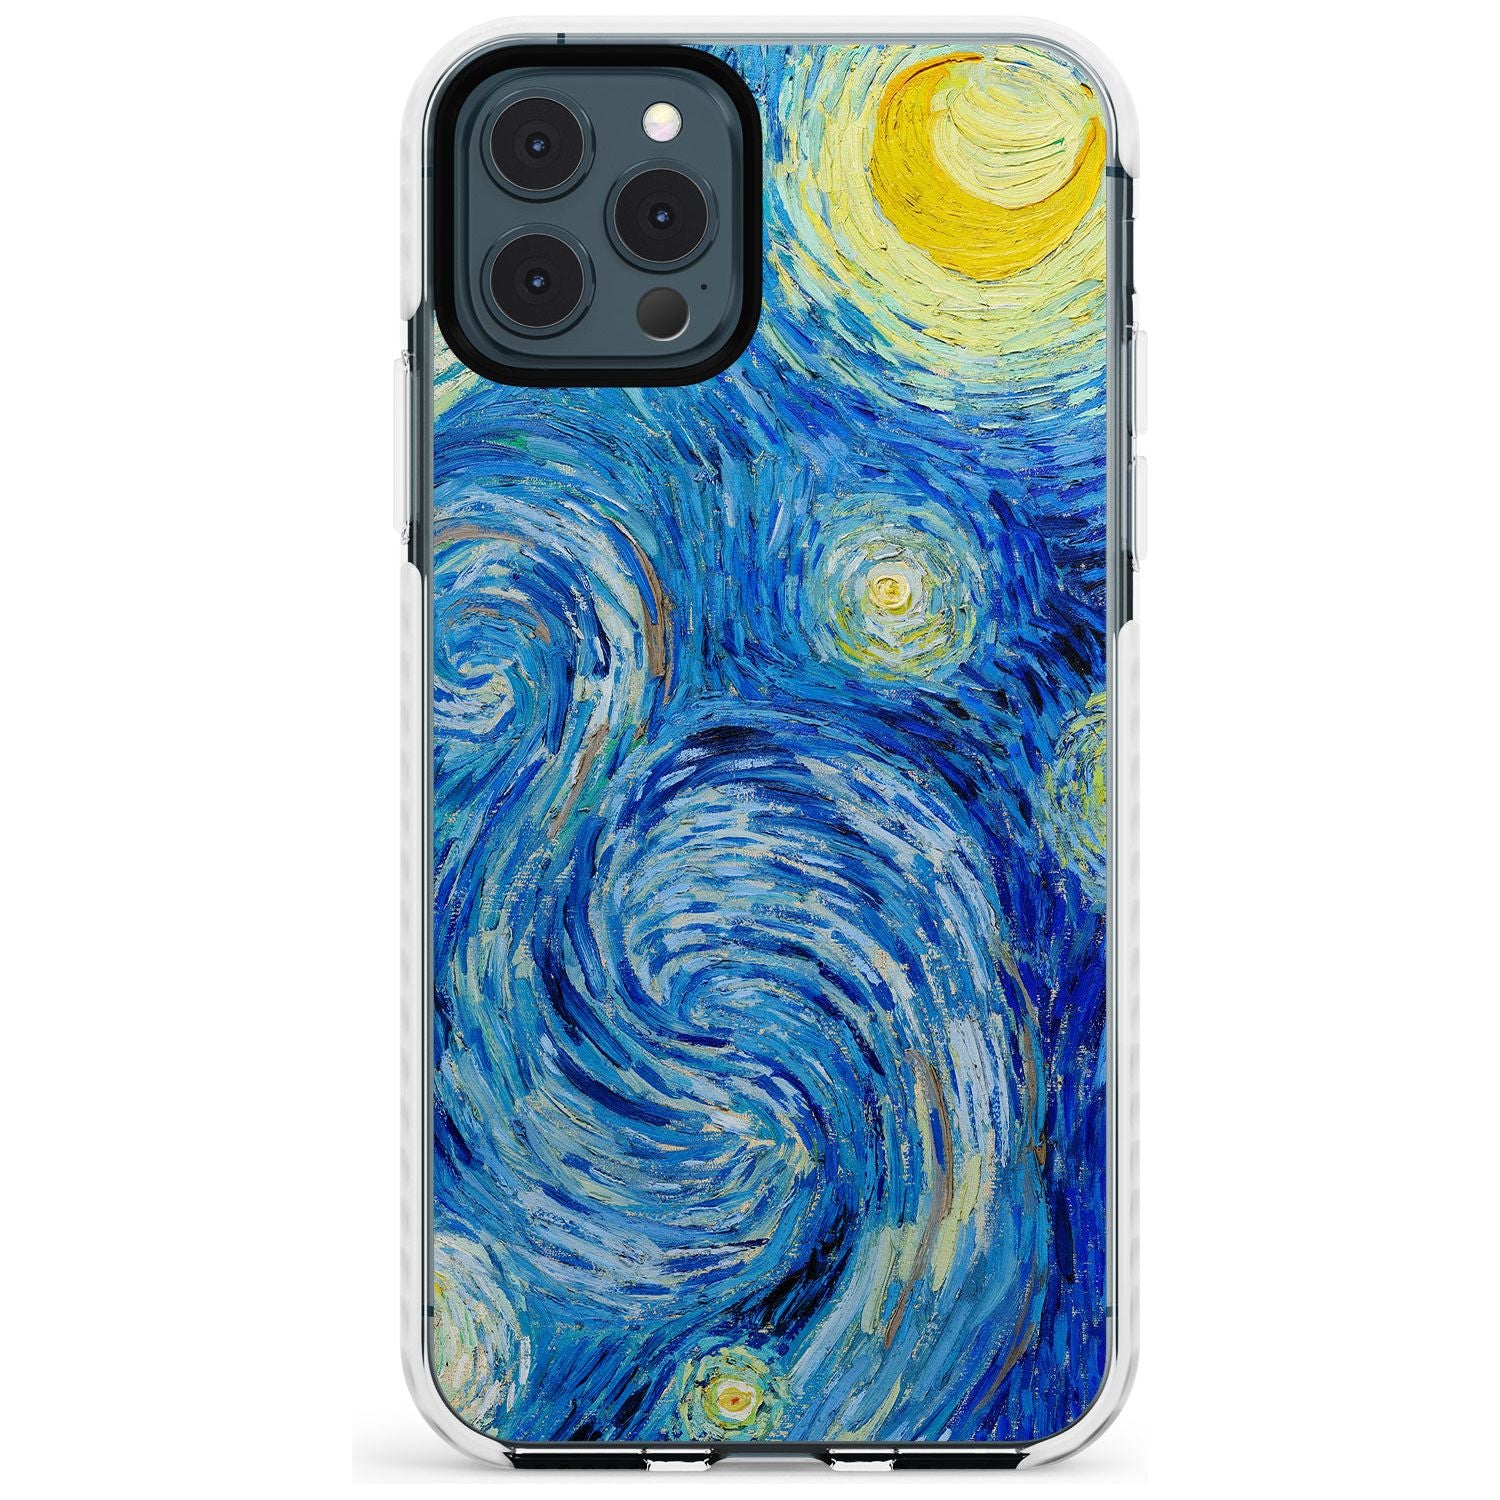 The Starry Night by Vincent Van Gogh Slim TPU Phone Case for iPhone 11 Pro Max